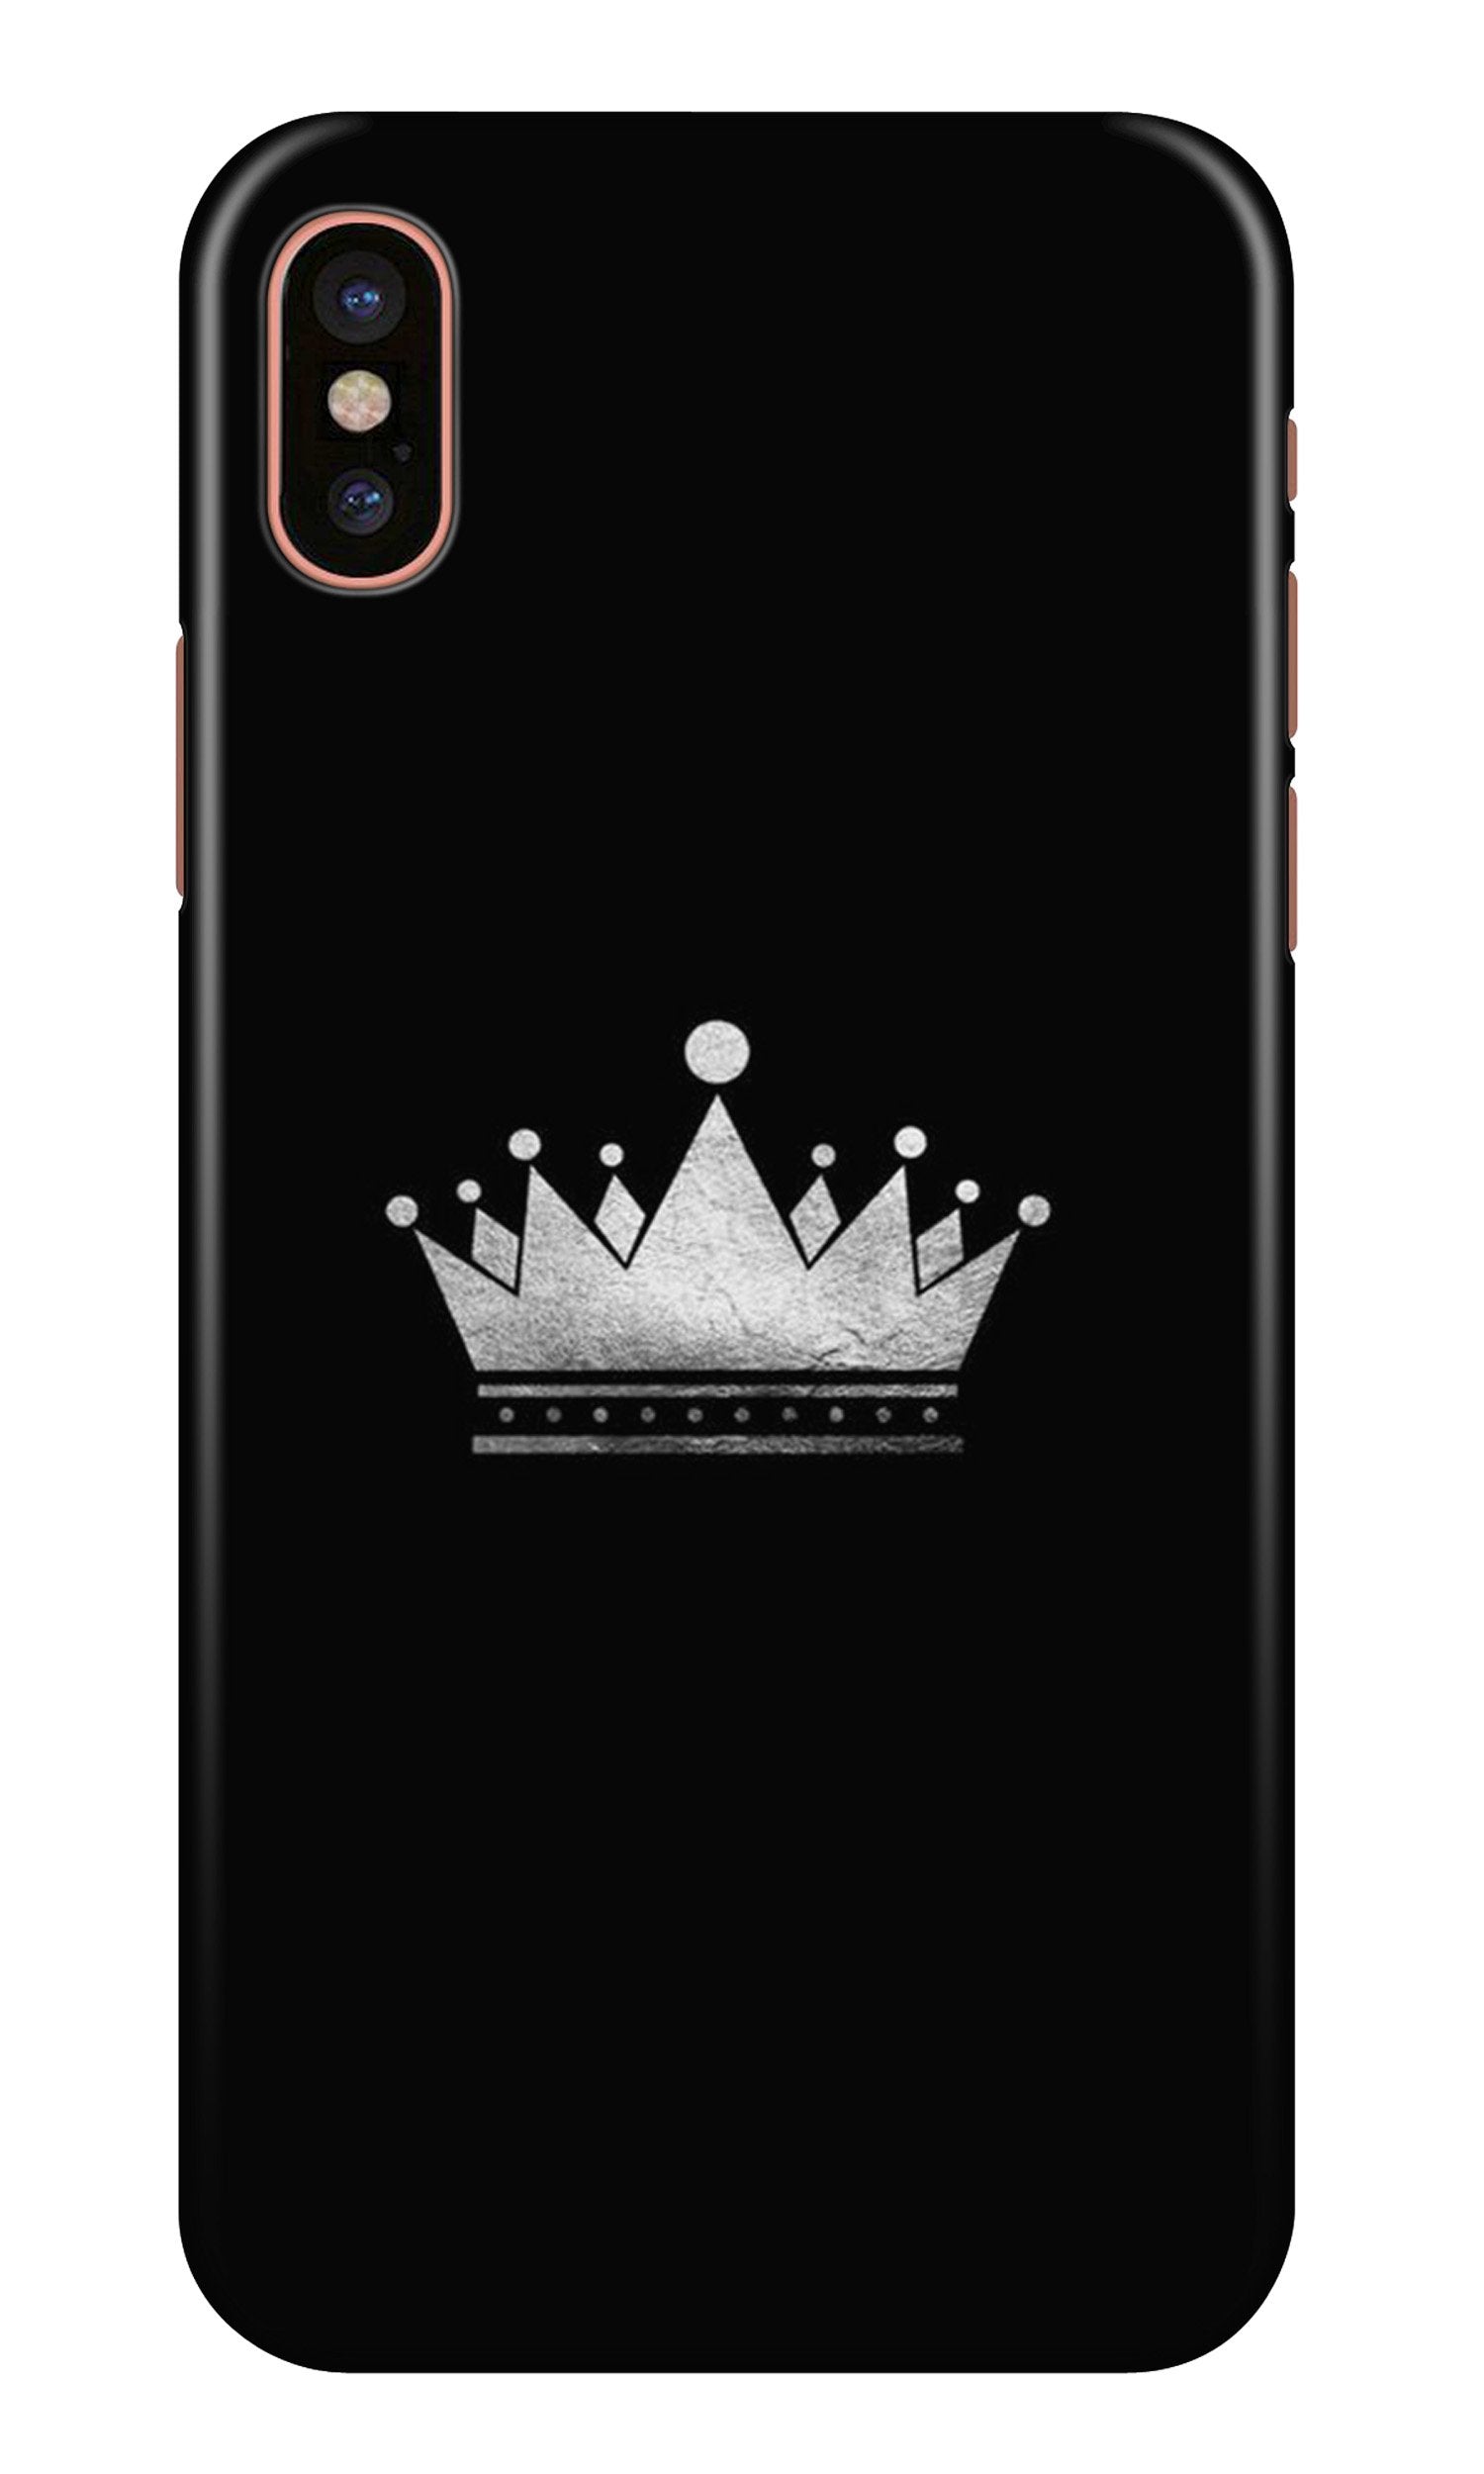 King Case for iPhone X (Design No. 280)